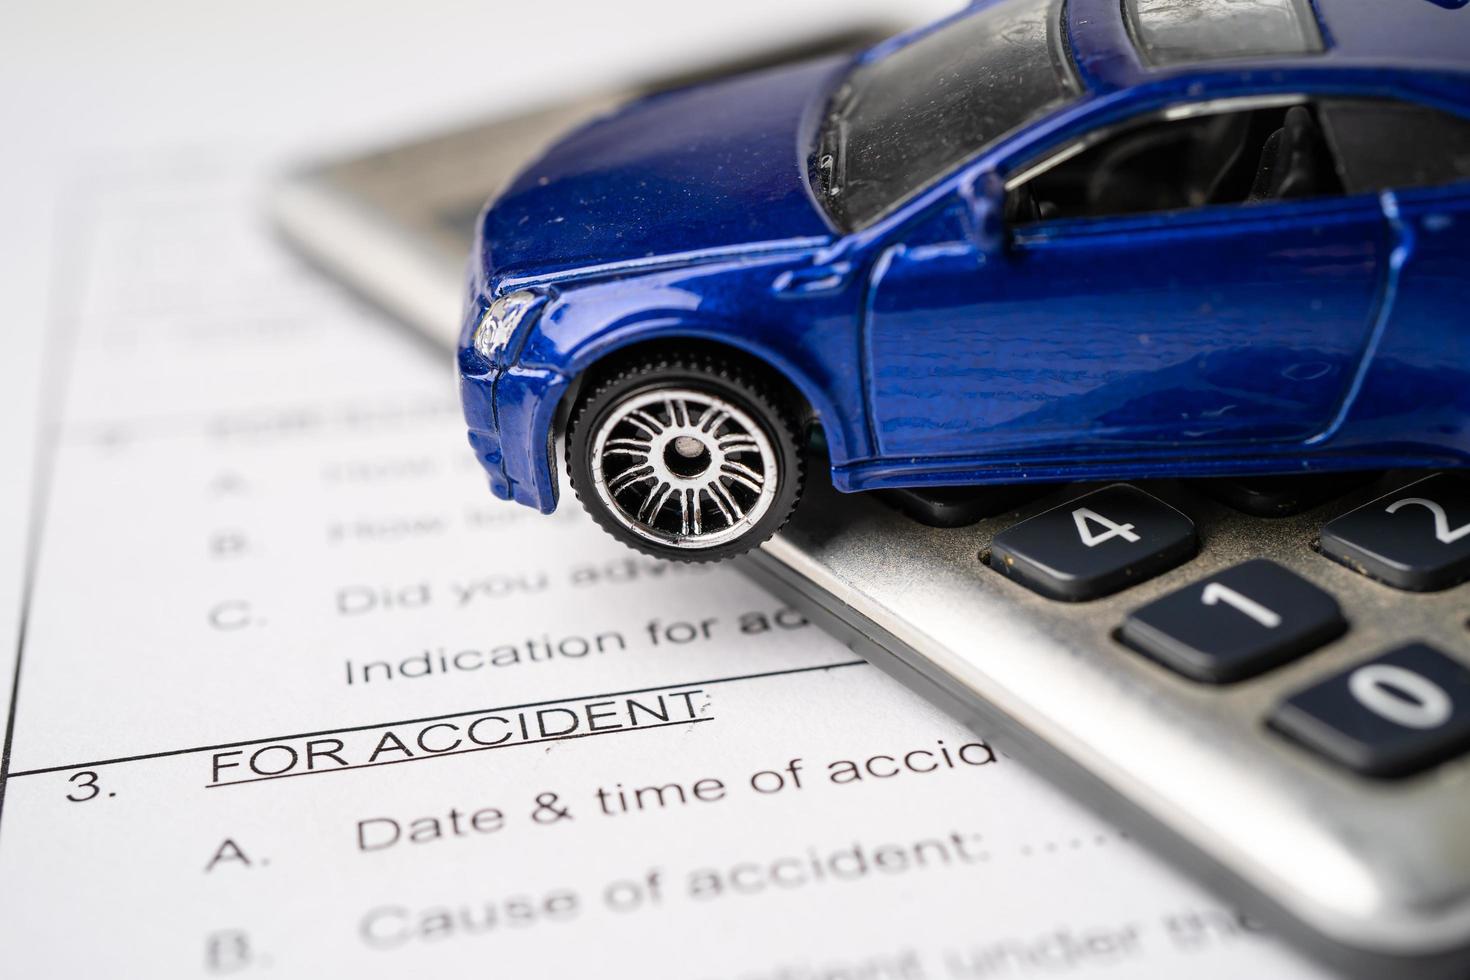 Car on Insurance claim accident car form background, Car loan, Finance, saving money, insurance and leasing time concepts. photo